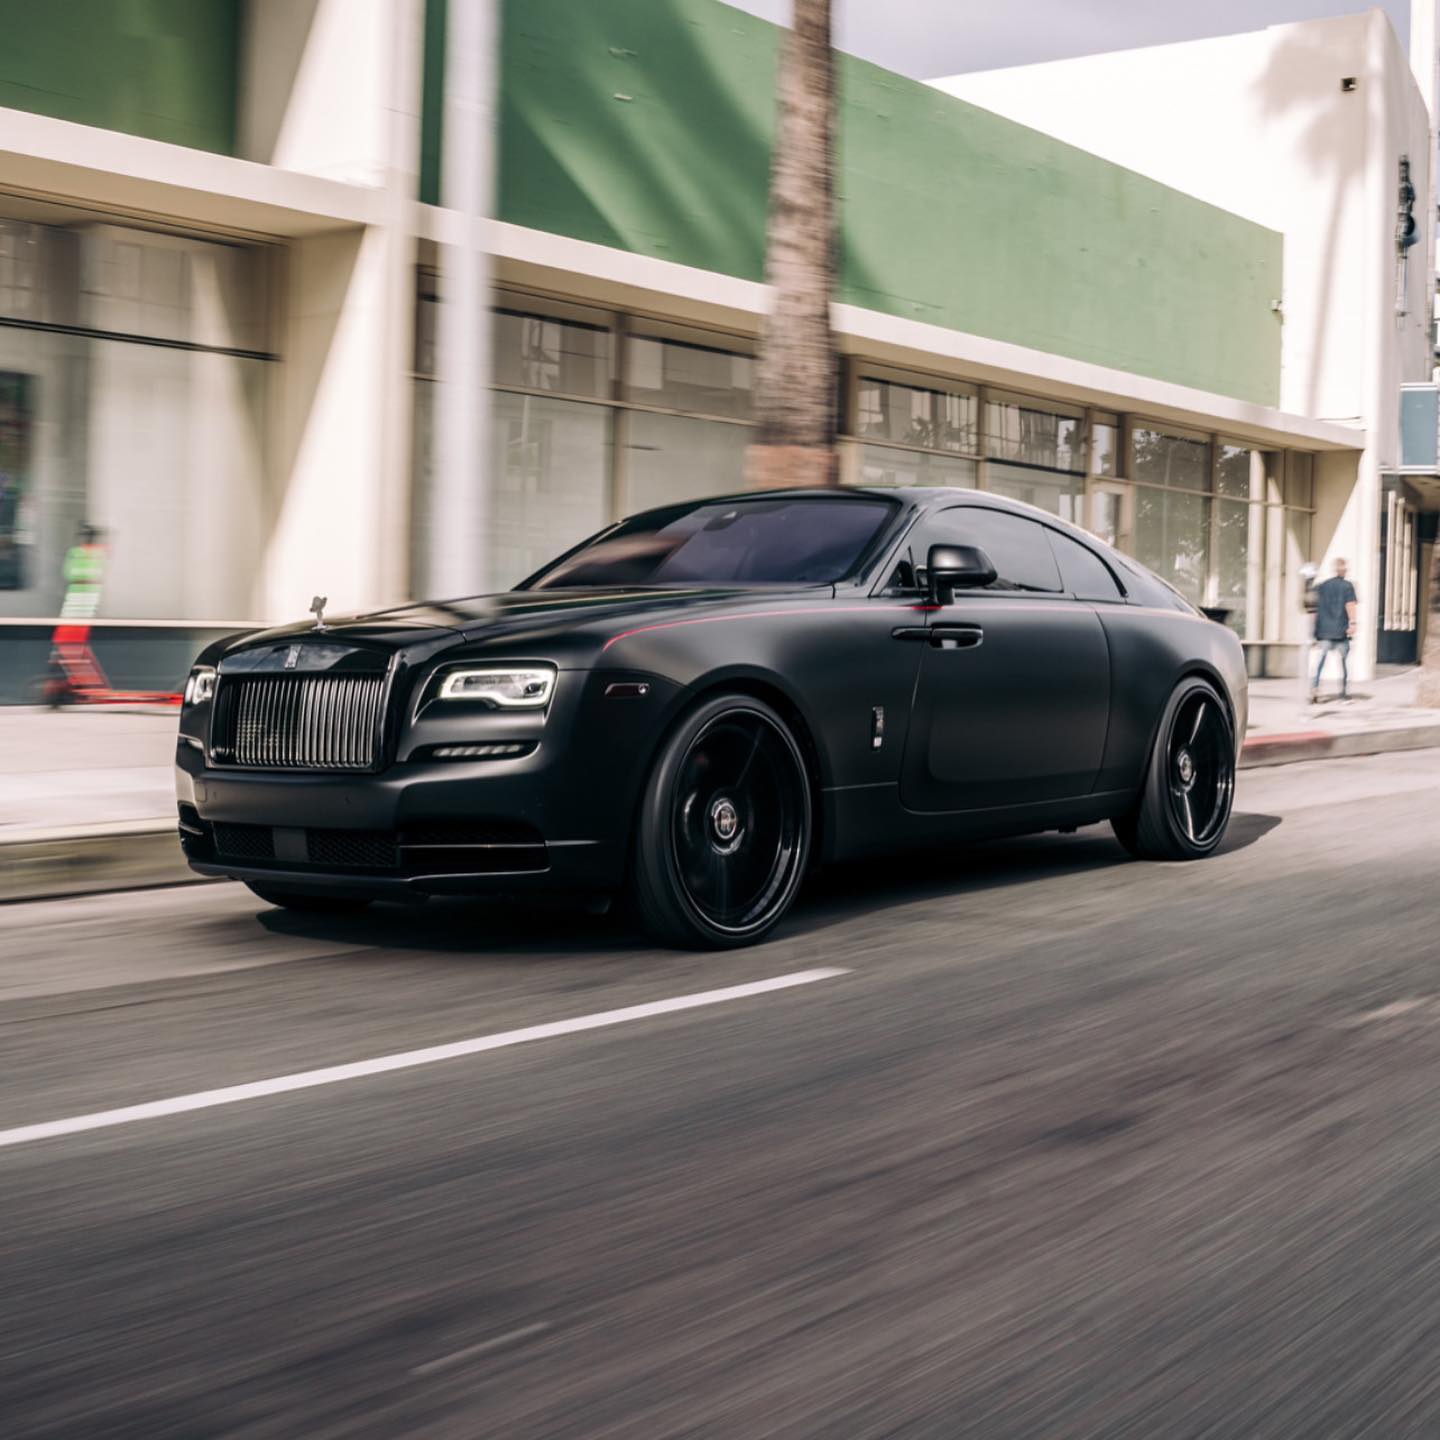 Sinister RollsRoyce Black Badge Wraith Tuned To Over 700 HP